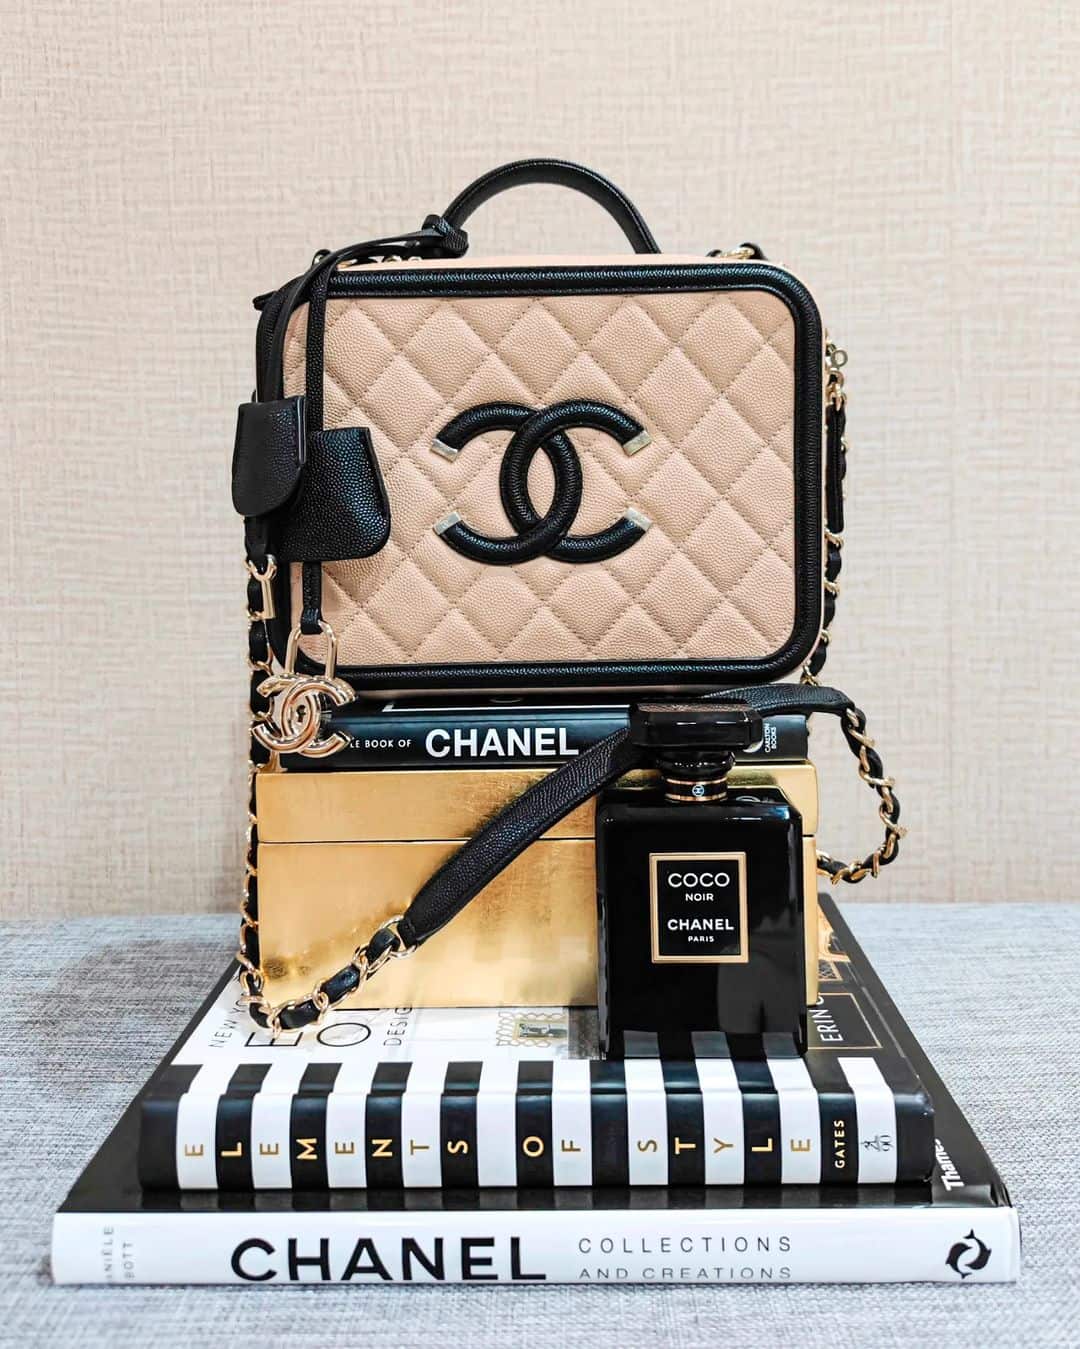 pink chanel bag for sale